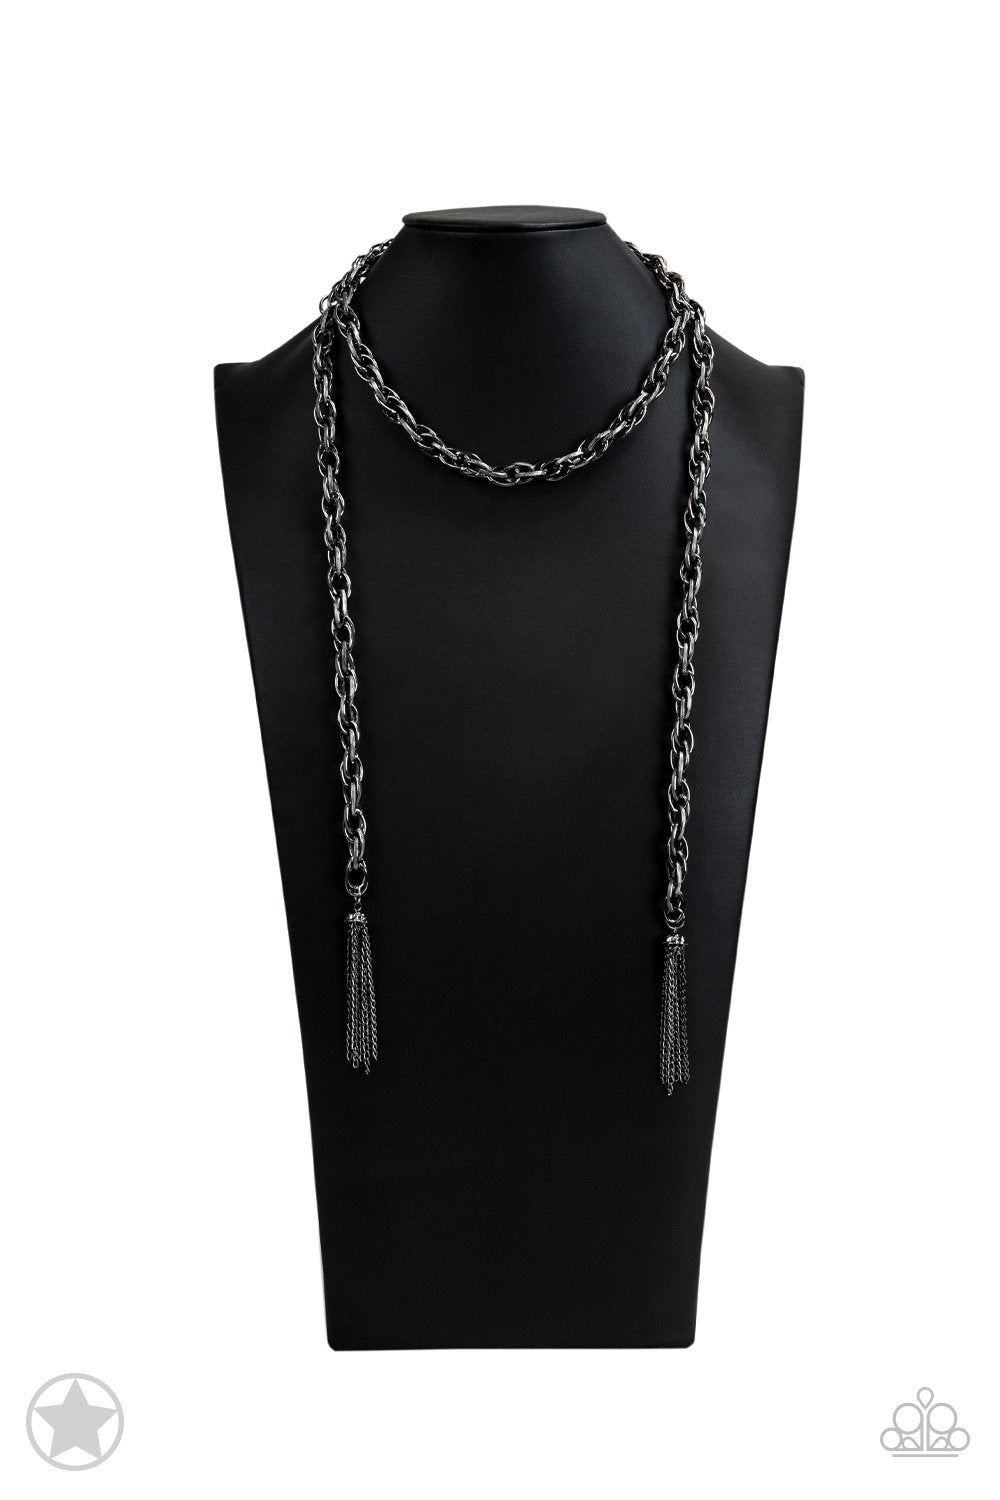 Scarfed for Attention Gunmetal Chain Necklace and matching Earrings - Paparazzi Accessories- on bust -CarasShop.com - $5 Jewelry by Cara Jewels